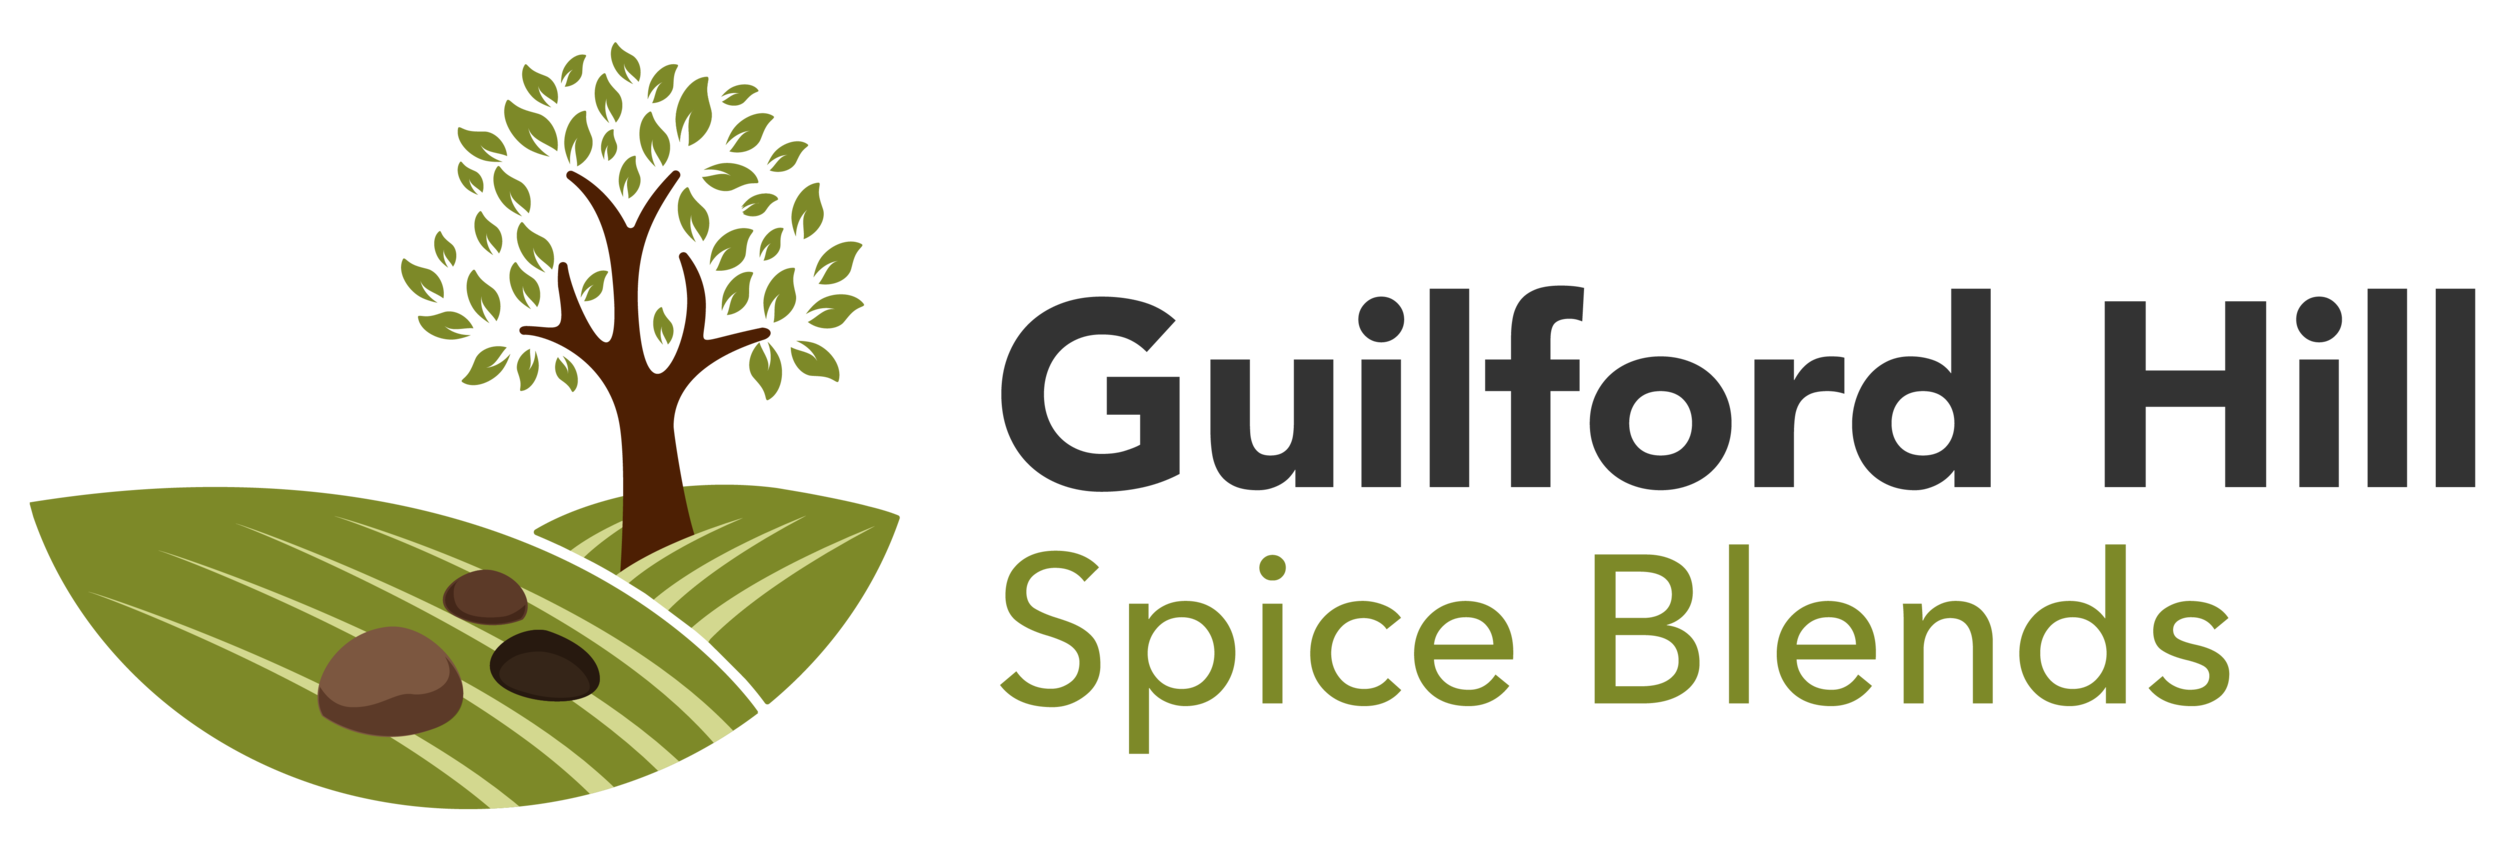 Guilford Hill Spice Blends